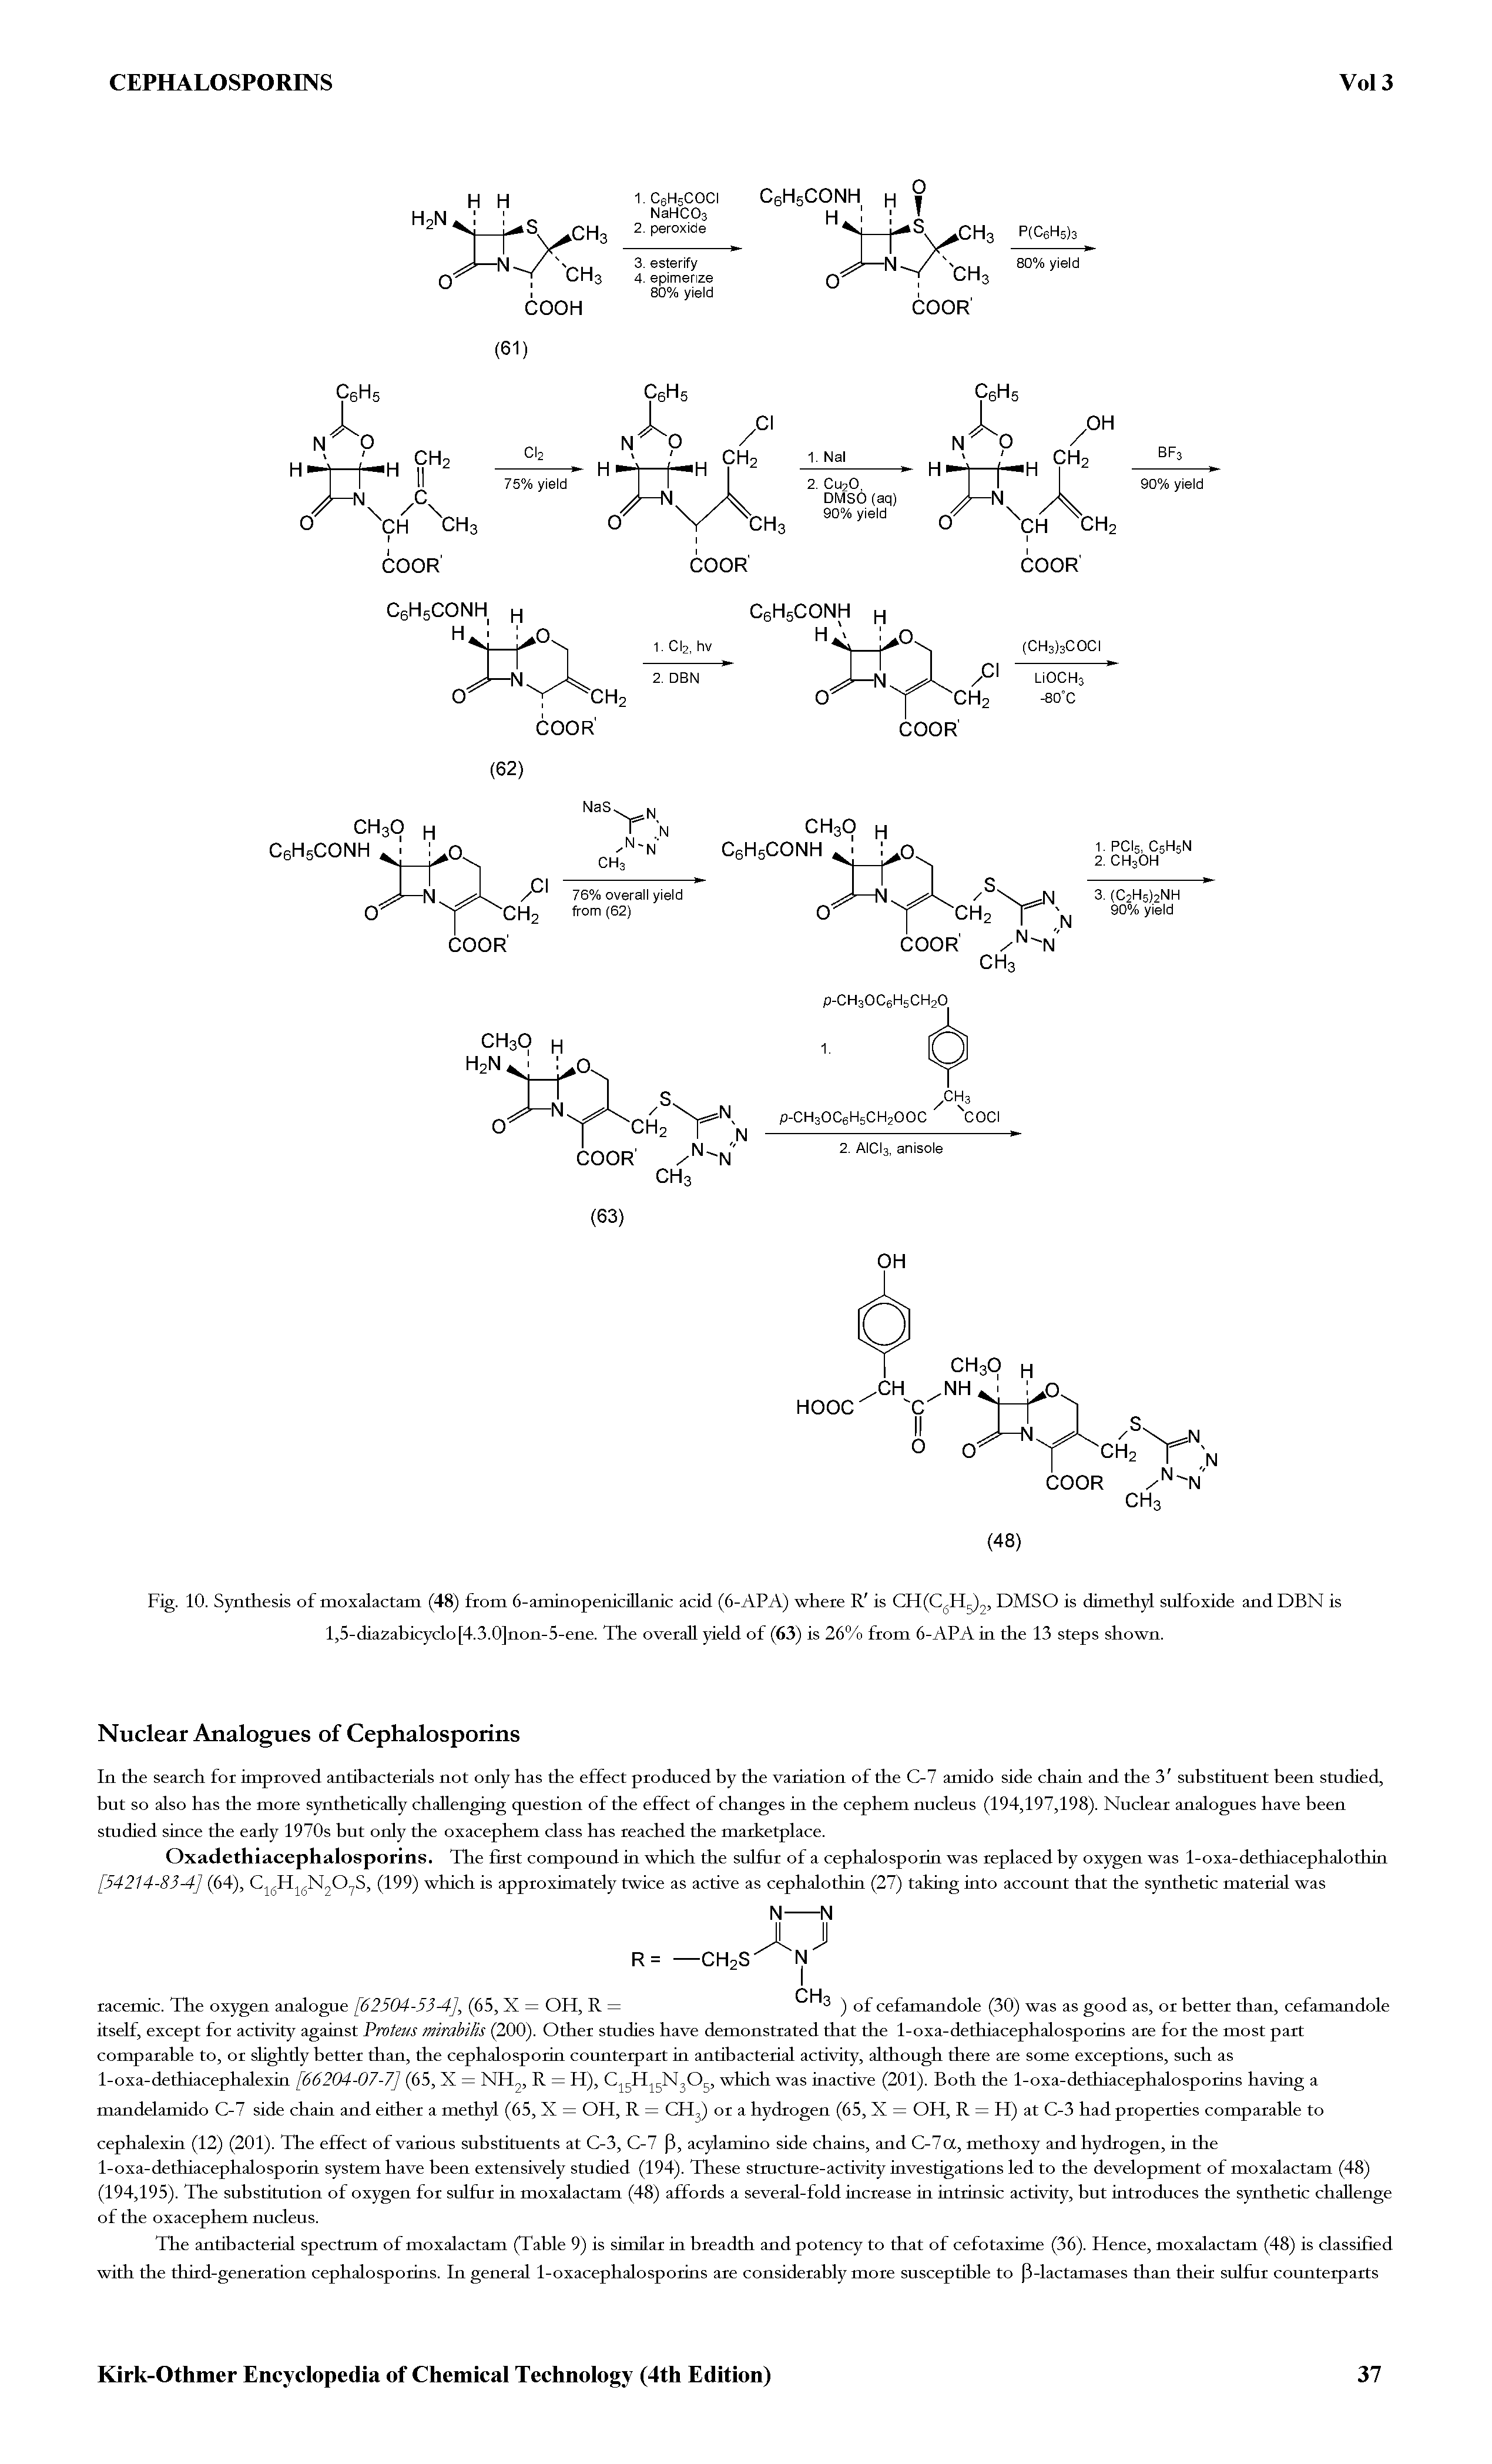 Fig. 10. Synthesis of moxalactam (48) from 6-amiaopeniciUanic acid (6-APA) where R is CH(CgH )2, DMSO is dimethyl sulfoxide and DBN is l,5-dia2abicyclo[4.3.0]non-5-ene. The overall yield of (63) is 26% from 6-APA in the 13 steps shown.